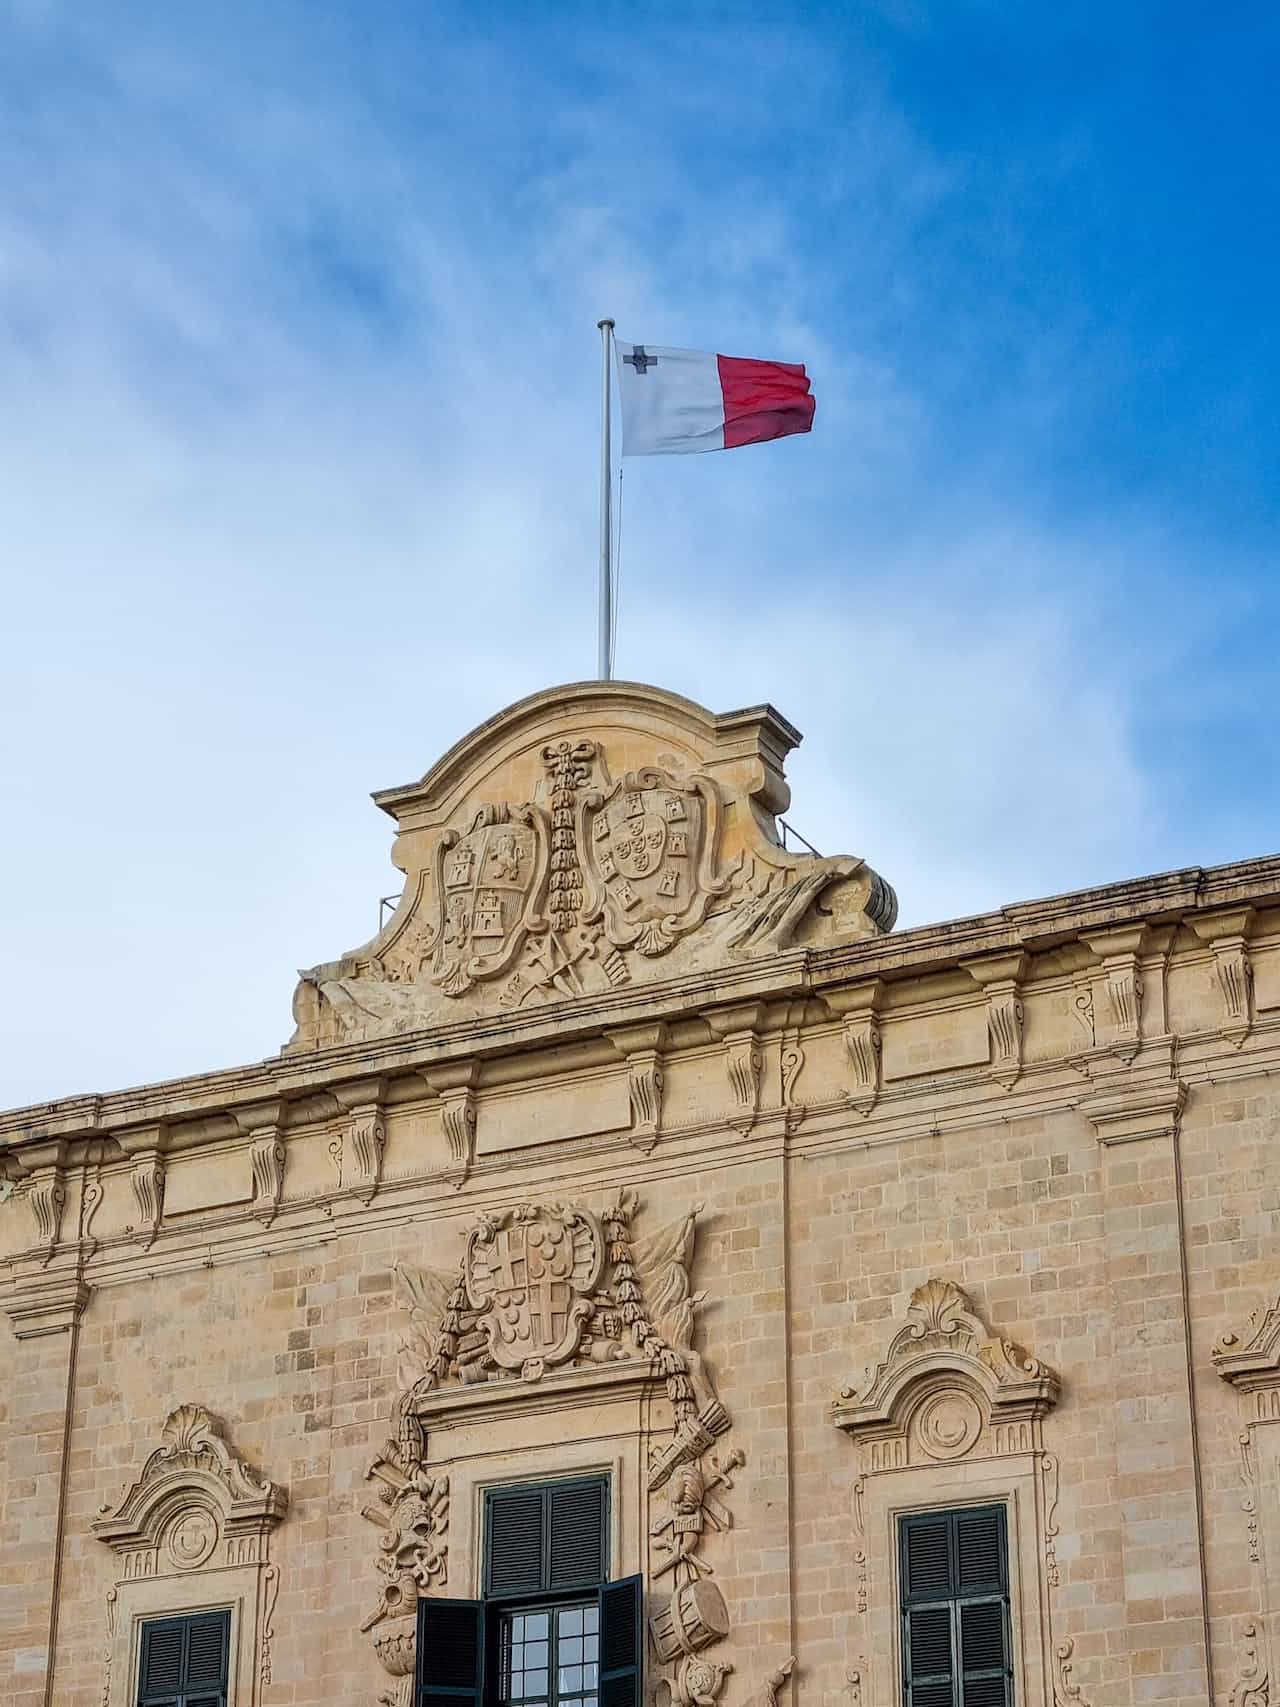 A white and red flag hoisted on a building against a blue sky.